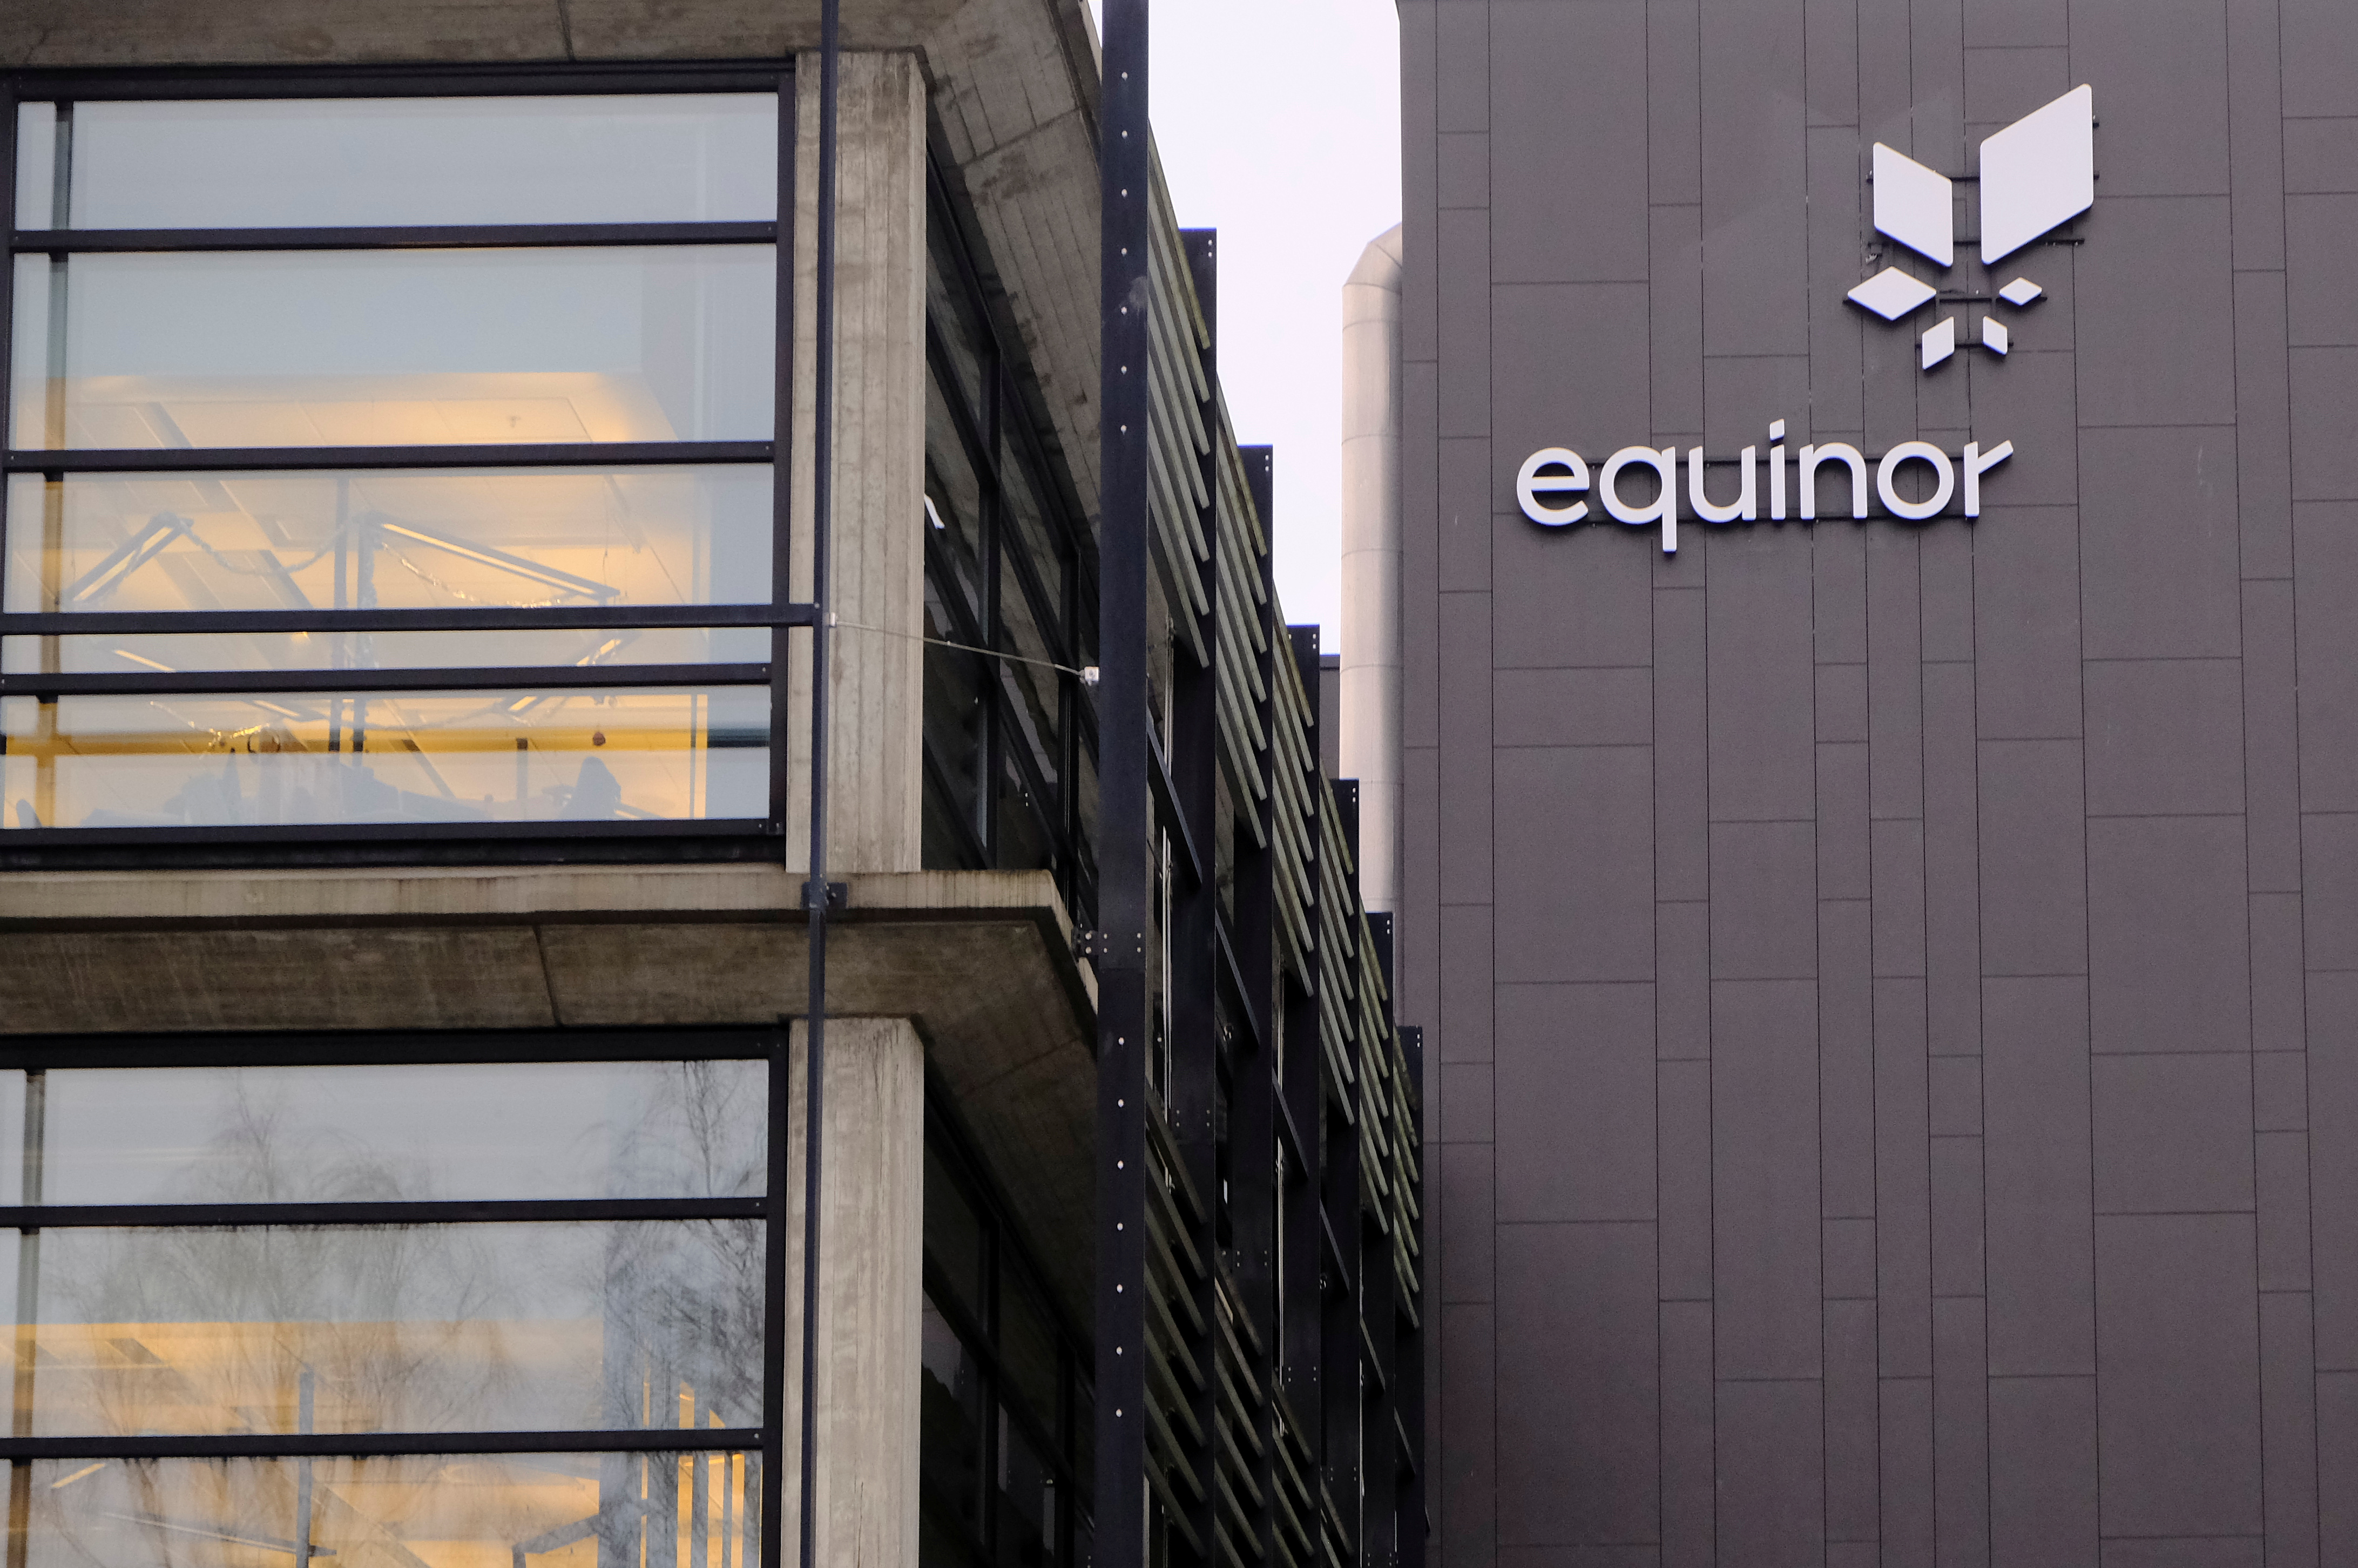 Equinor's logo is seen at the company's headquarters in Stavanger